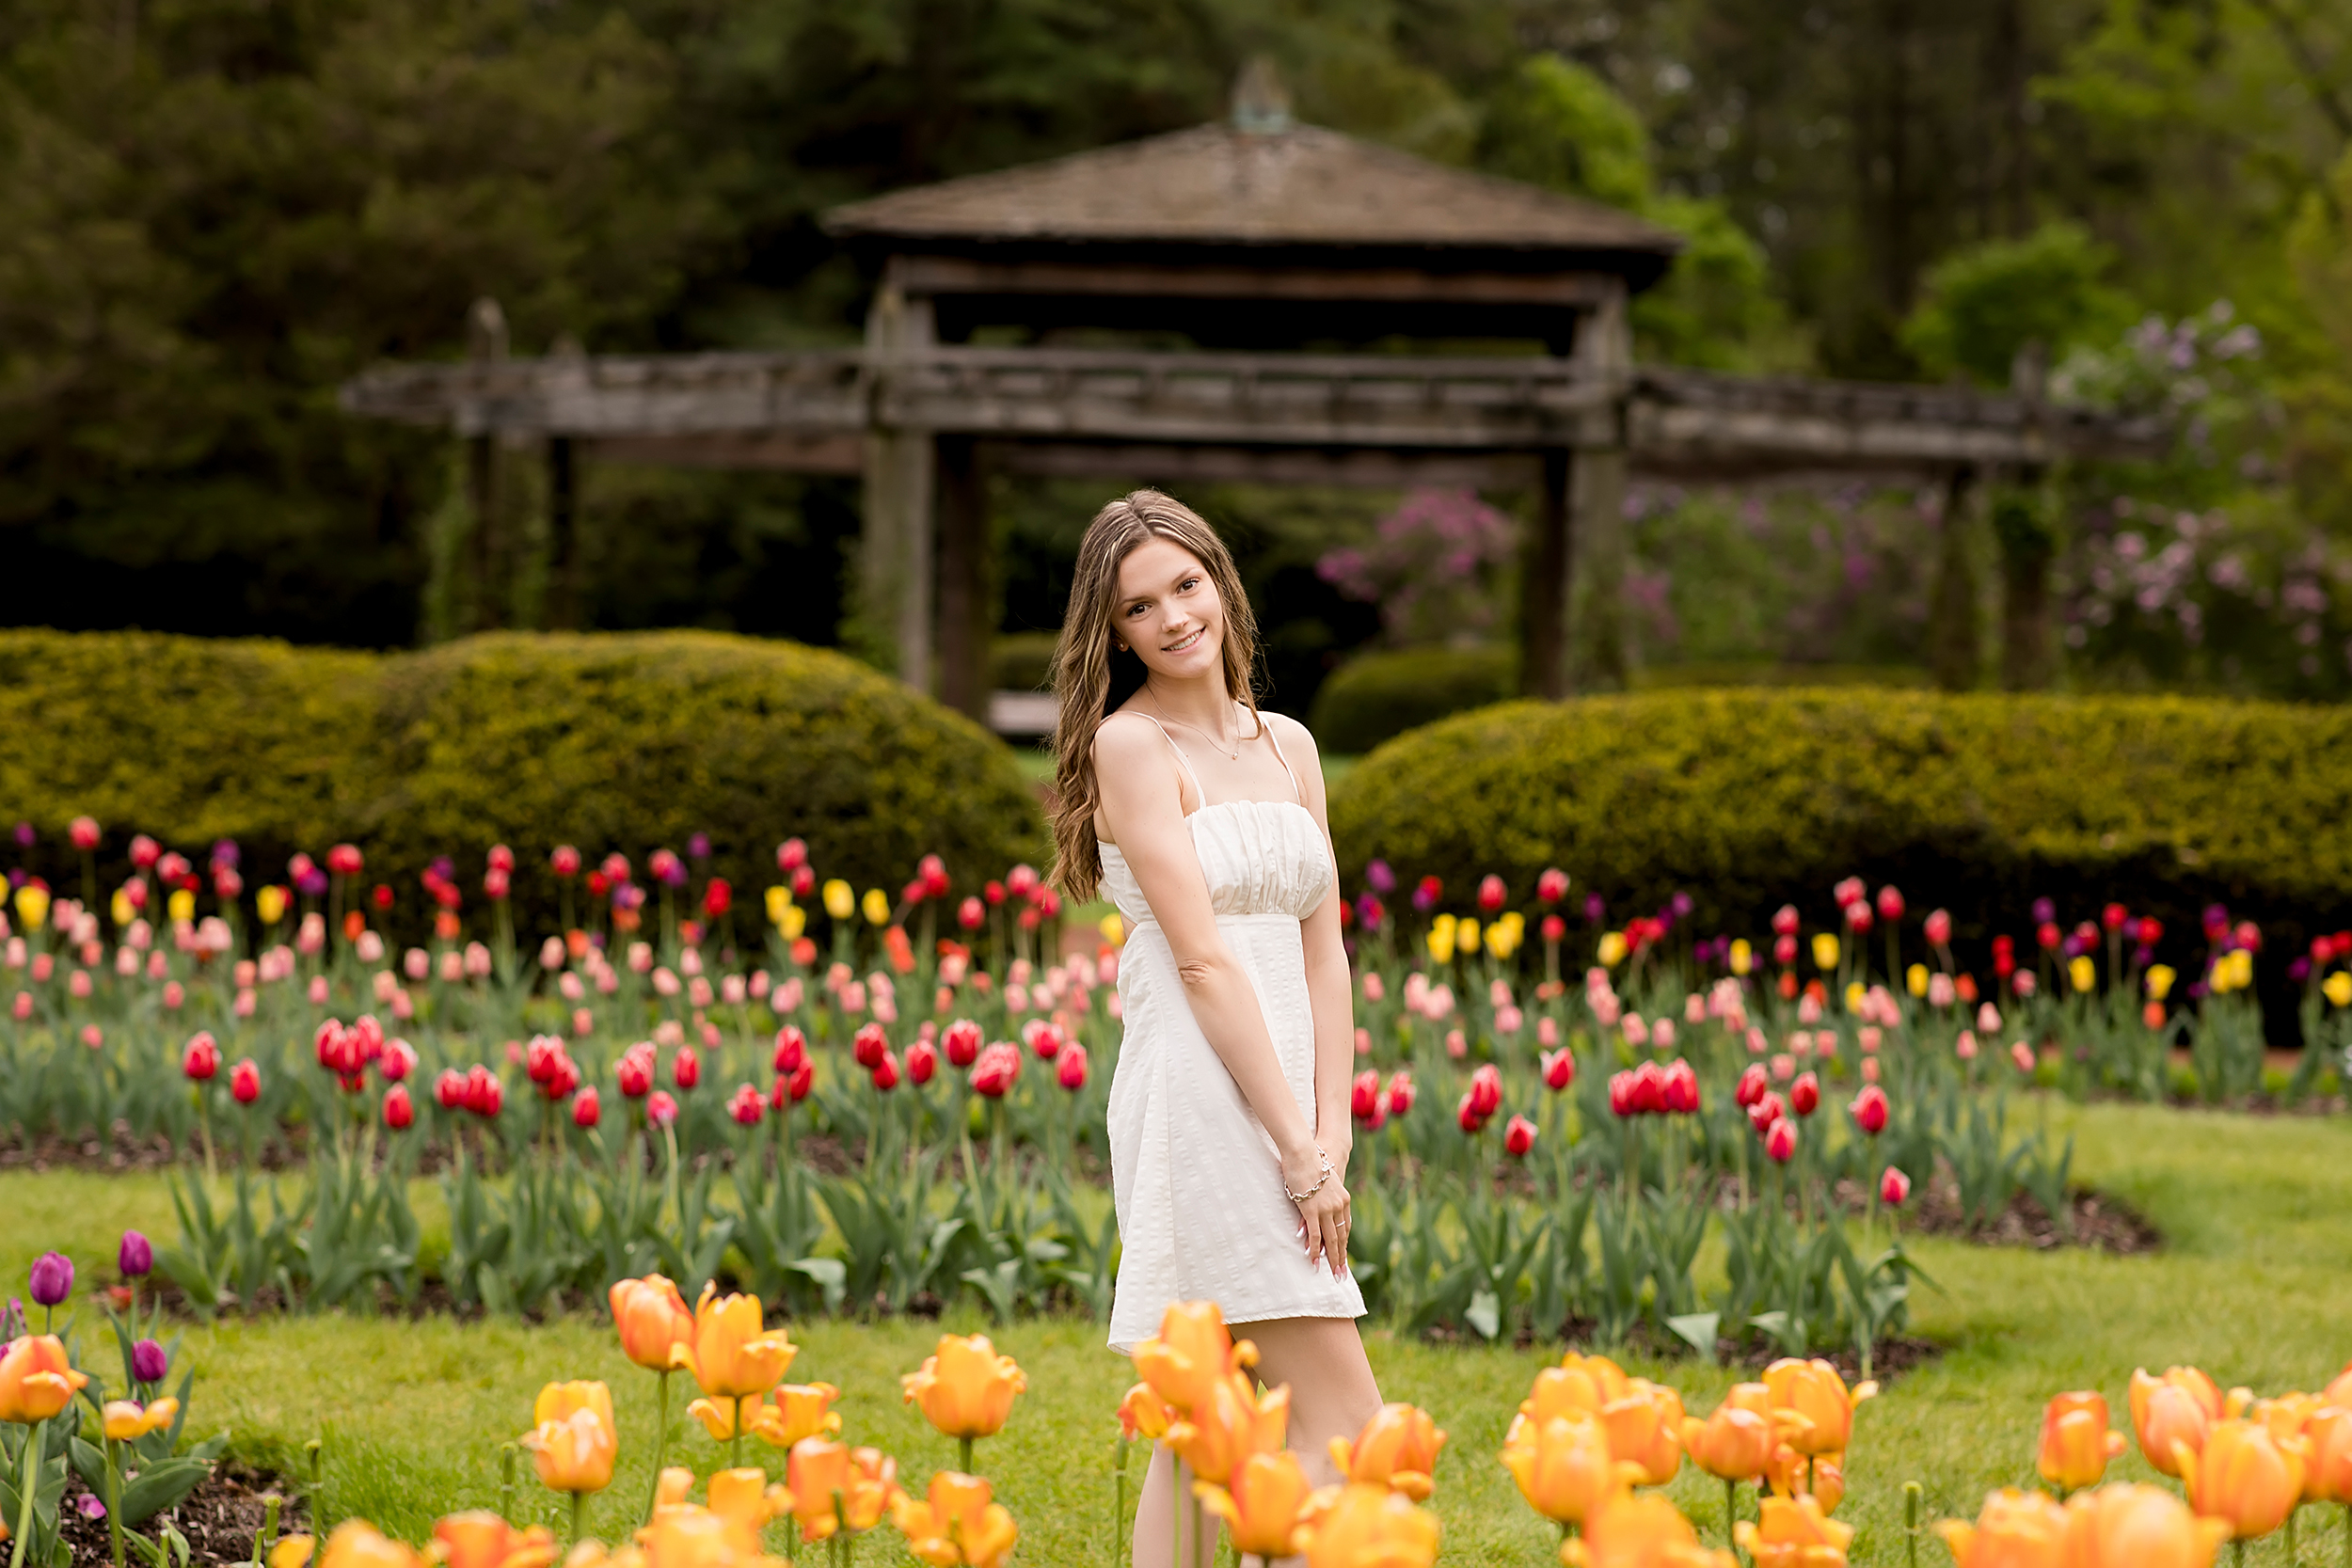 teenage girl in white dress standing in a tulip garden, Senior photo session at Elizabeth State Park, West Hartford, CT Photographer